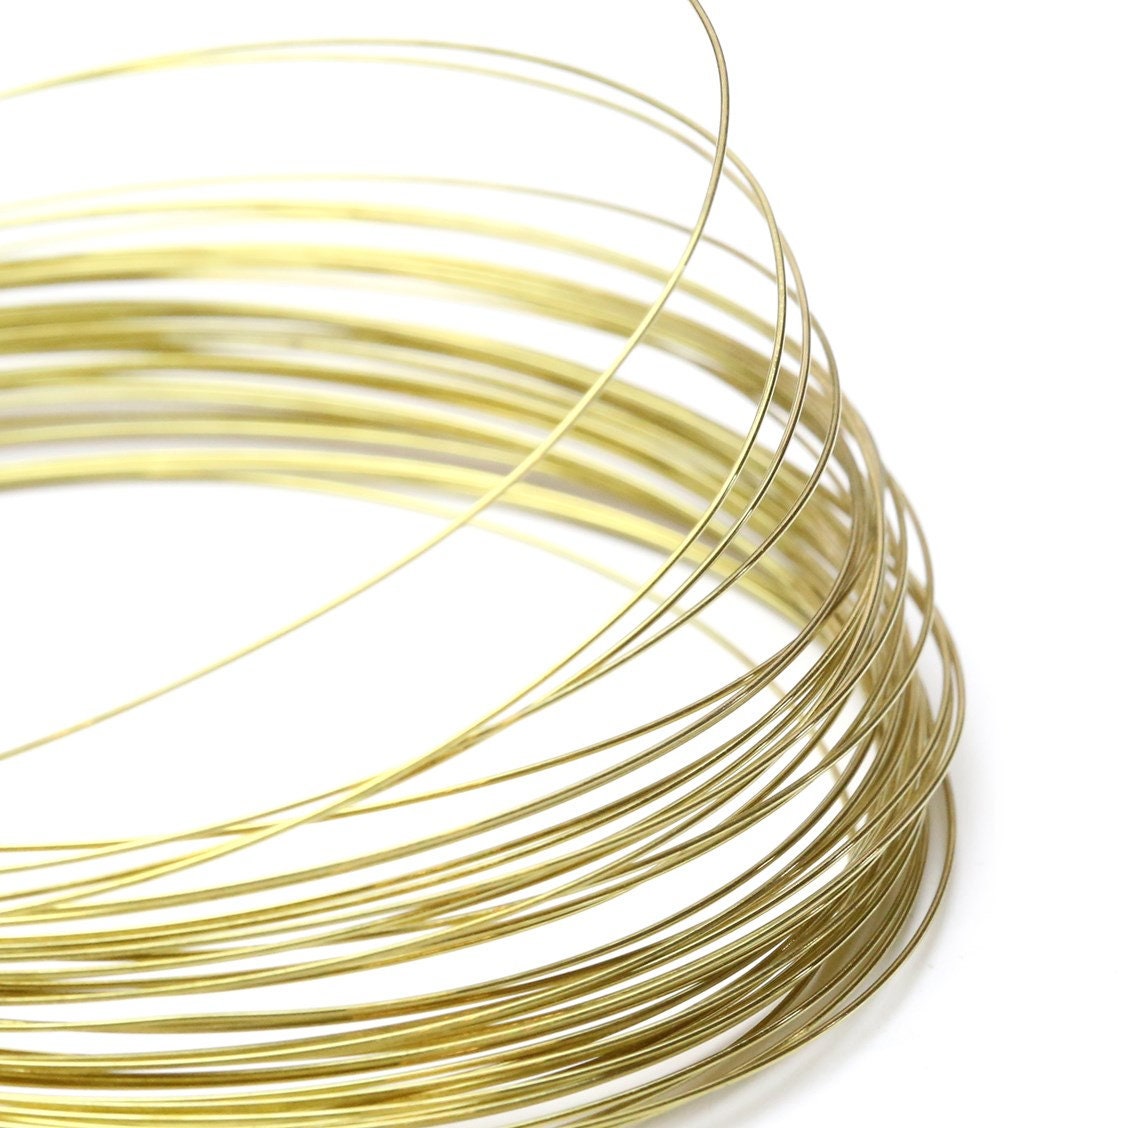 SMO GOLD SOLDER WIRE: Solders Jewellery Making